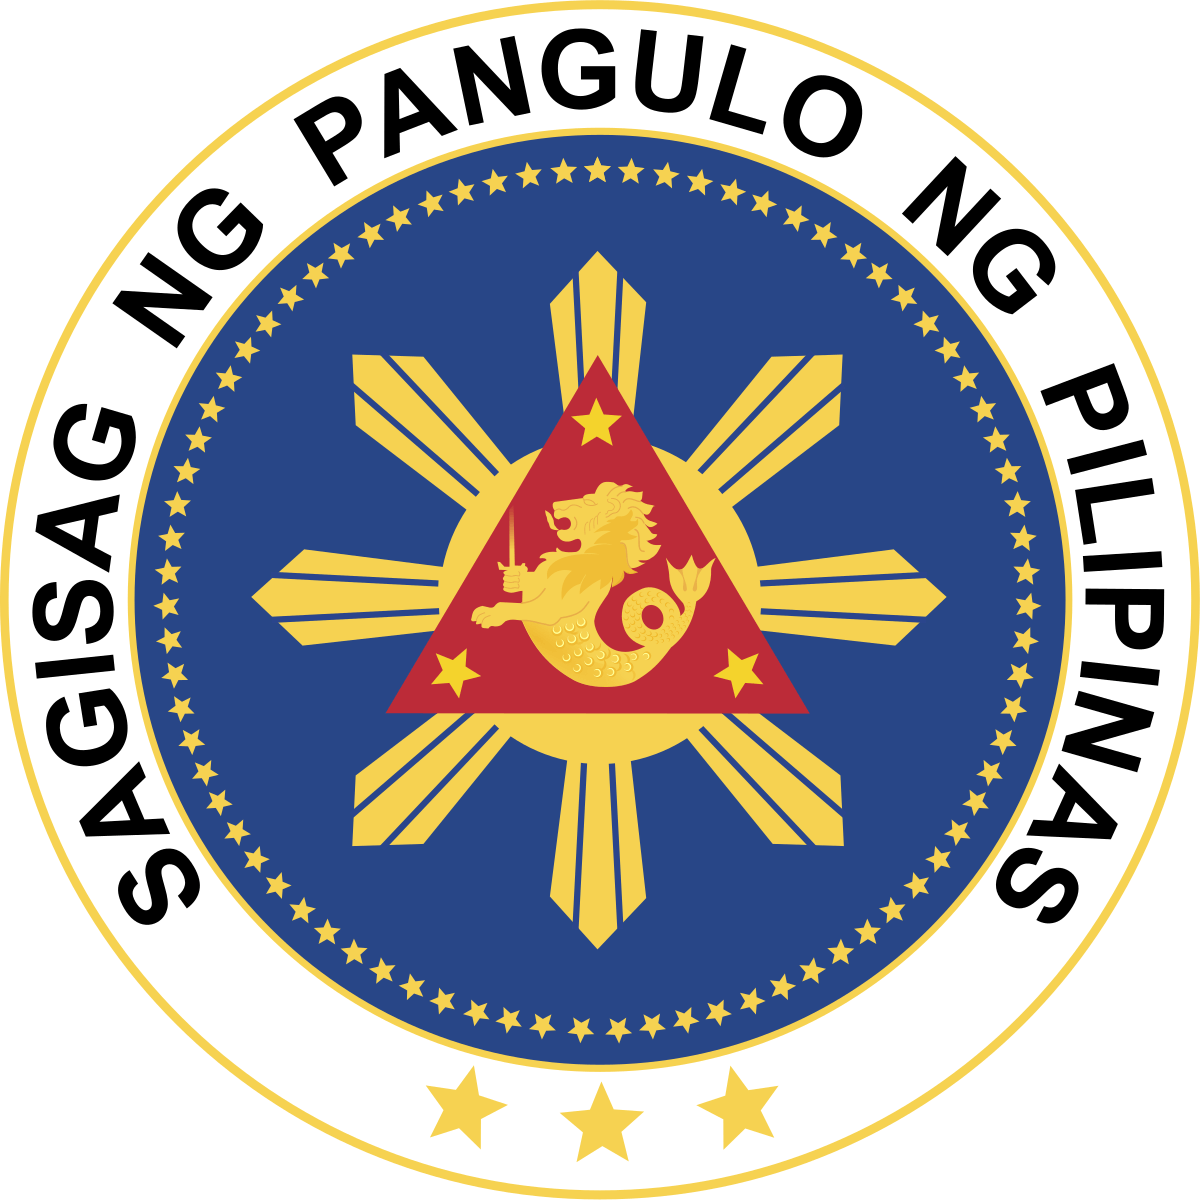 Phillippines Logo - Seal of the President of the Philippines